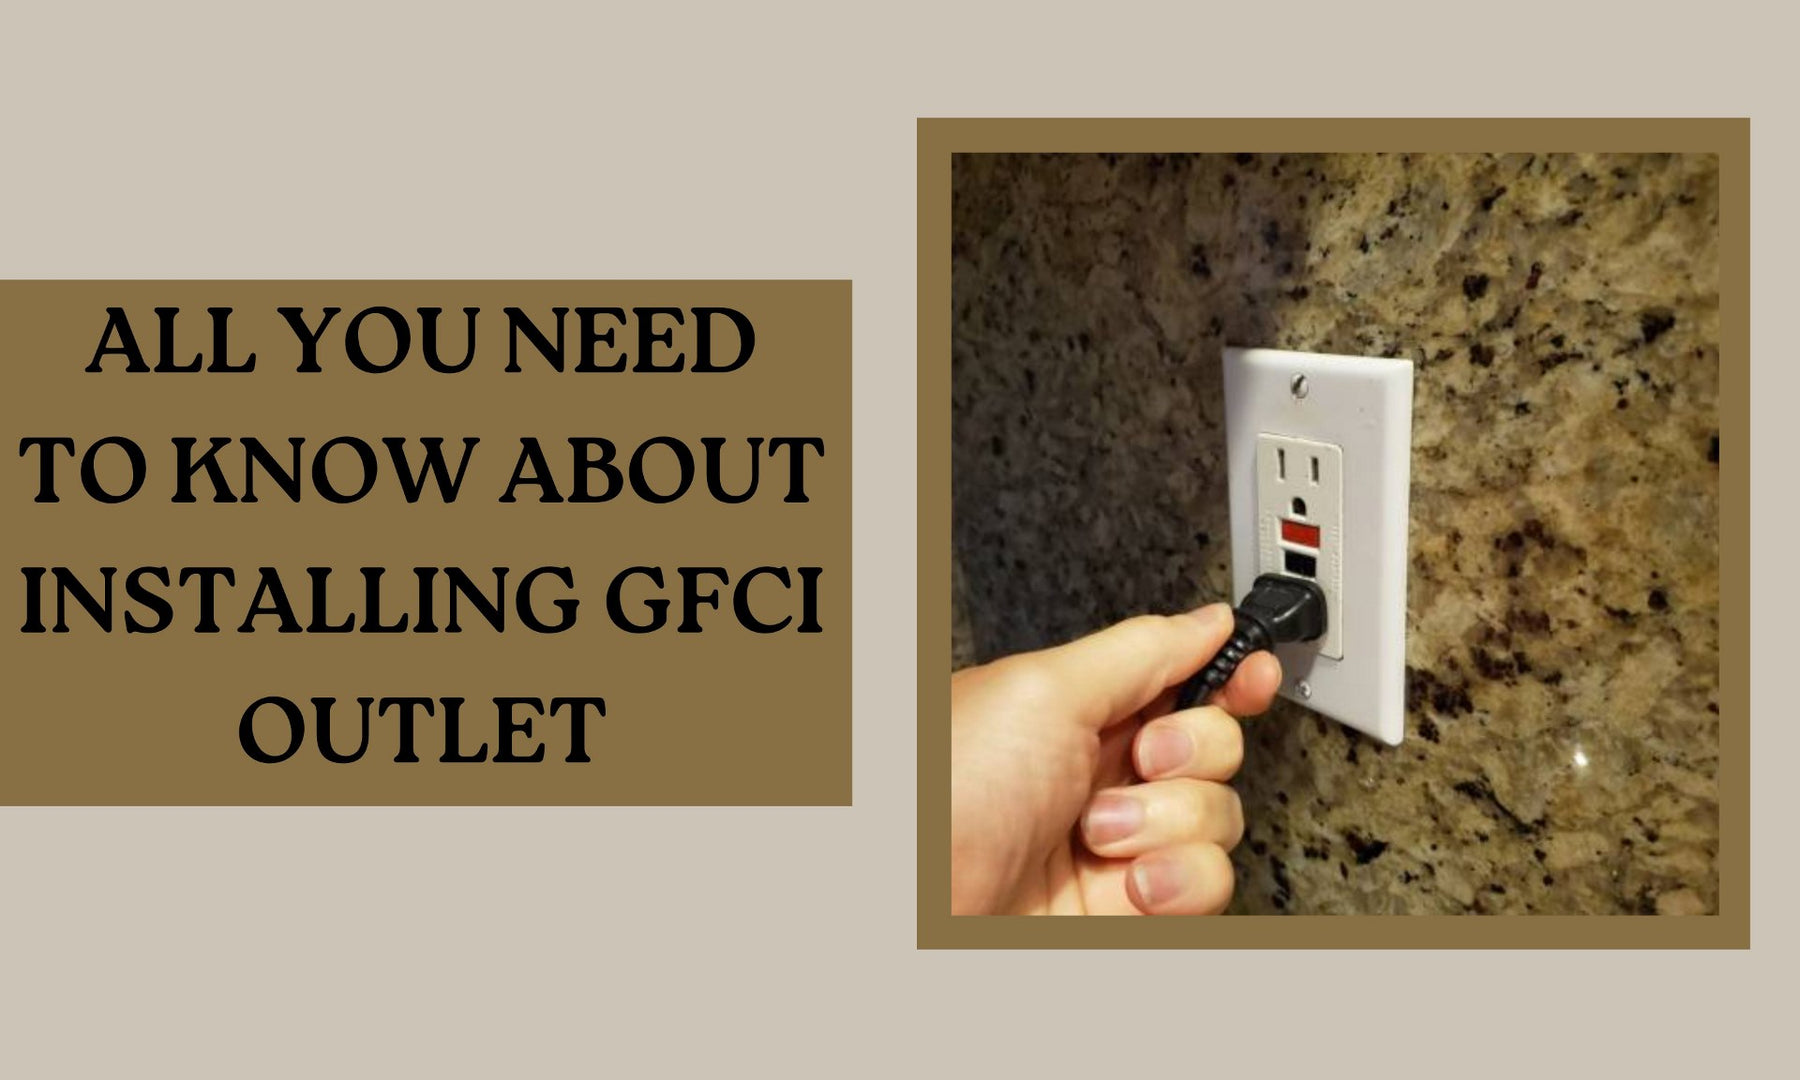 All You Need to Know About Installing GFCI Outlet